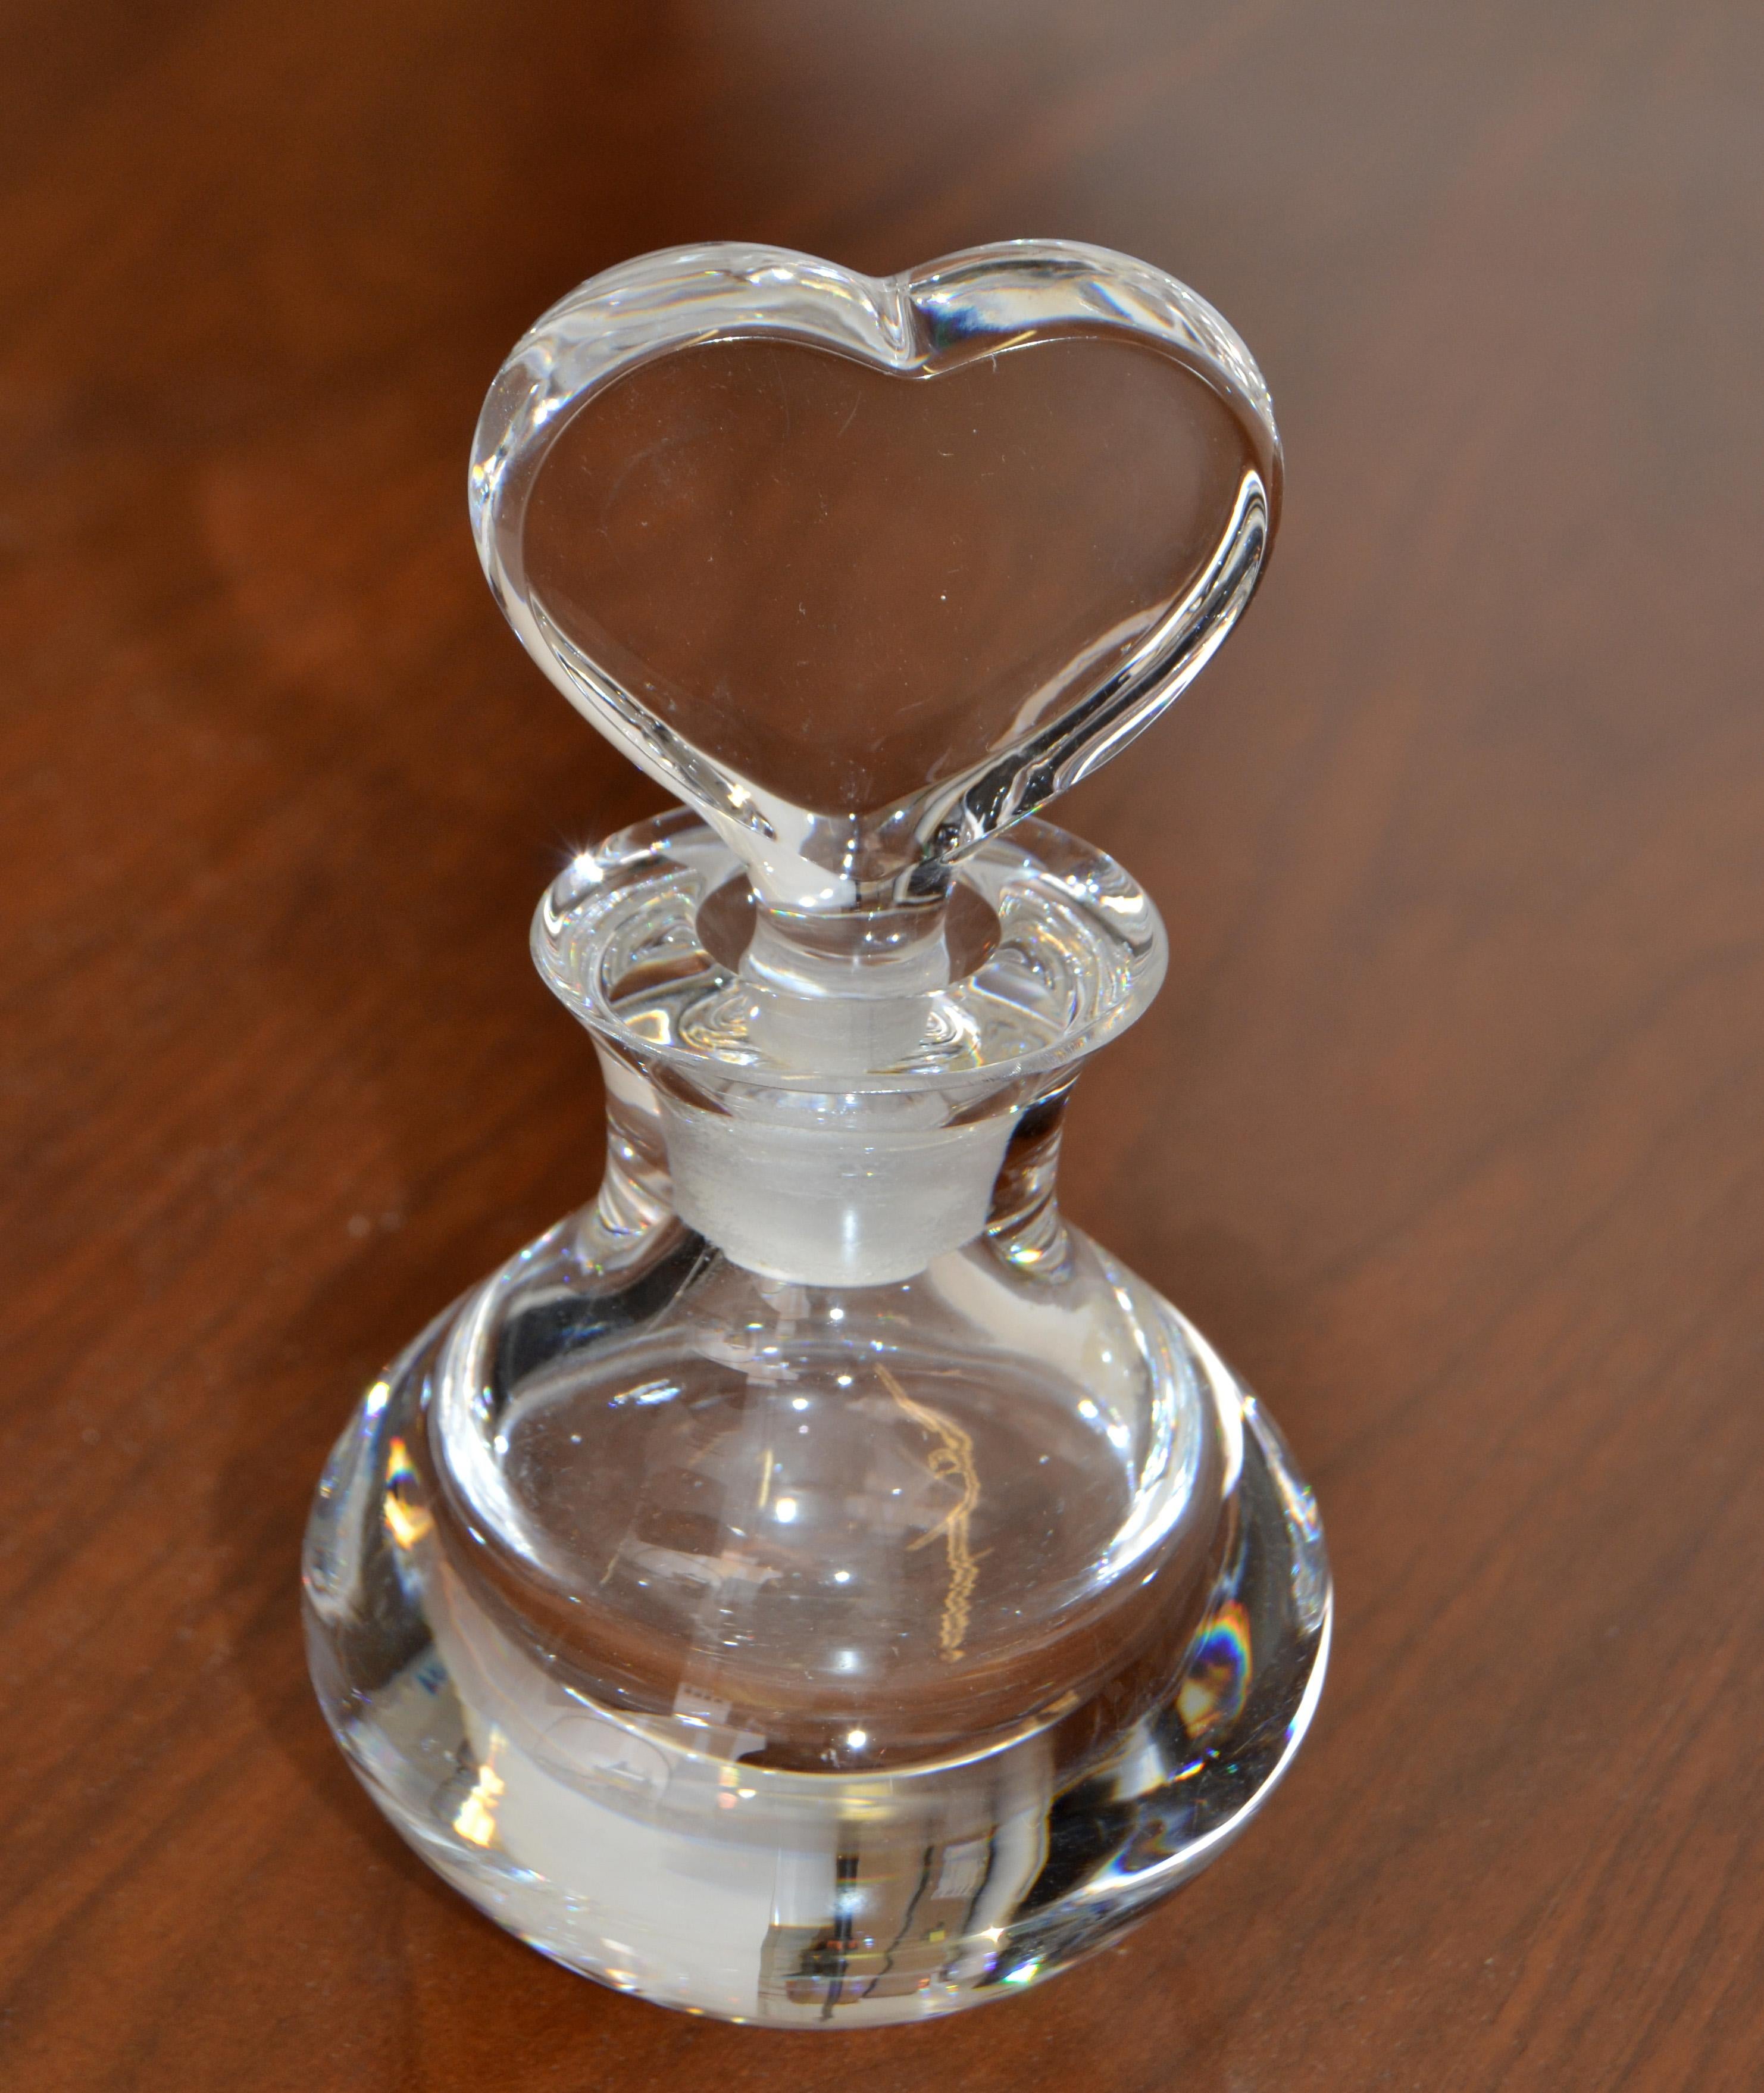 Vintage clear signed Orrefors blown and handmade art glass perfume bottle with a heart shaped stopper.
Scandinavian Mid-Century Modern Vessel made in Sweden circa 1980s.
Heavy perfume flacon which looks different from each angle.
Signed Orrefors